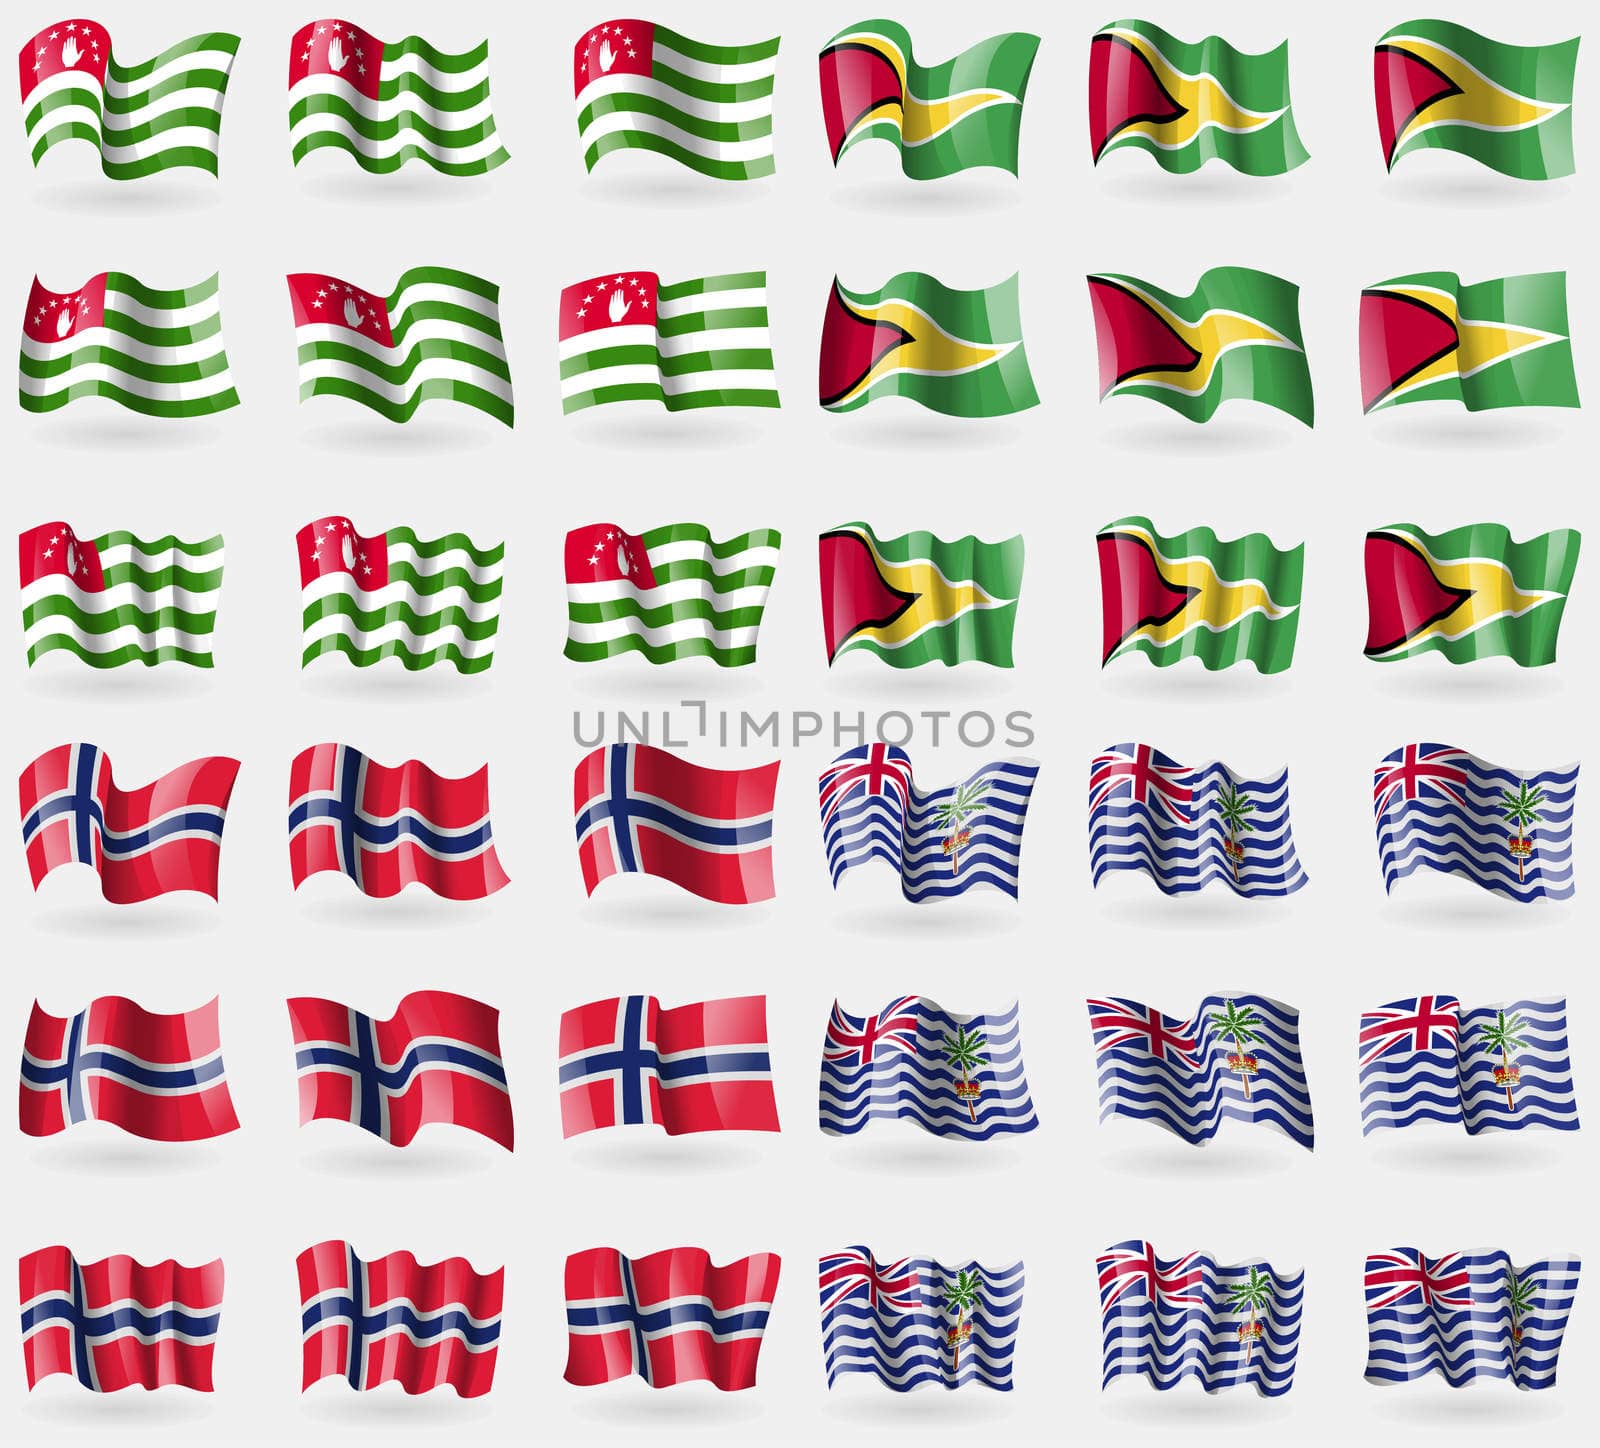 Abkhazia, Guyana, Norway, Brirish Indian Ocean Territory. Set of 36 flags of the countries of the world. illustration